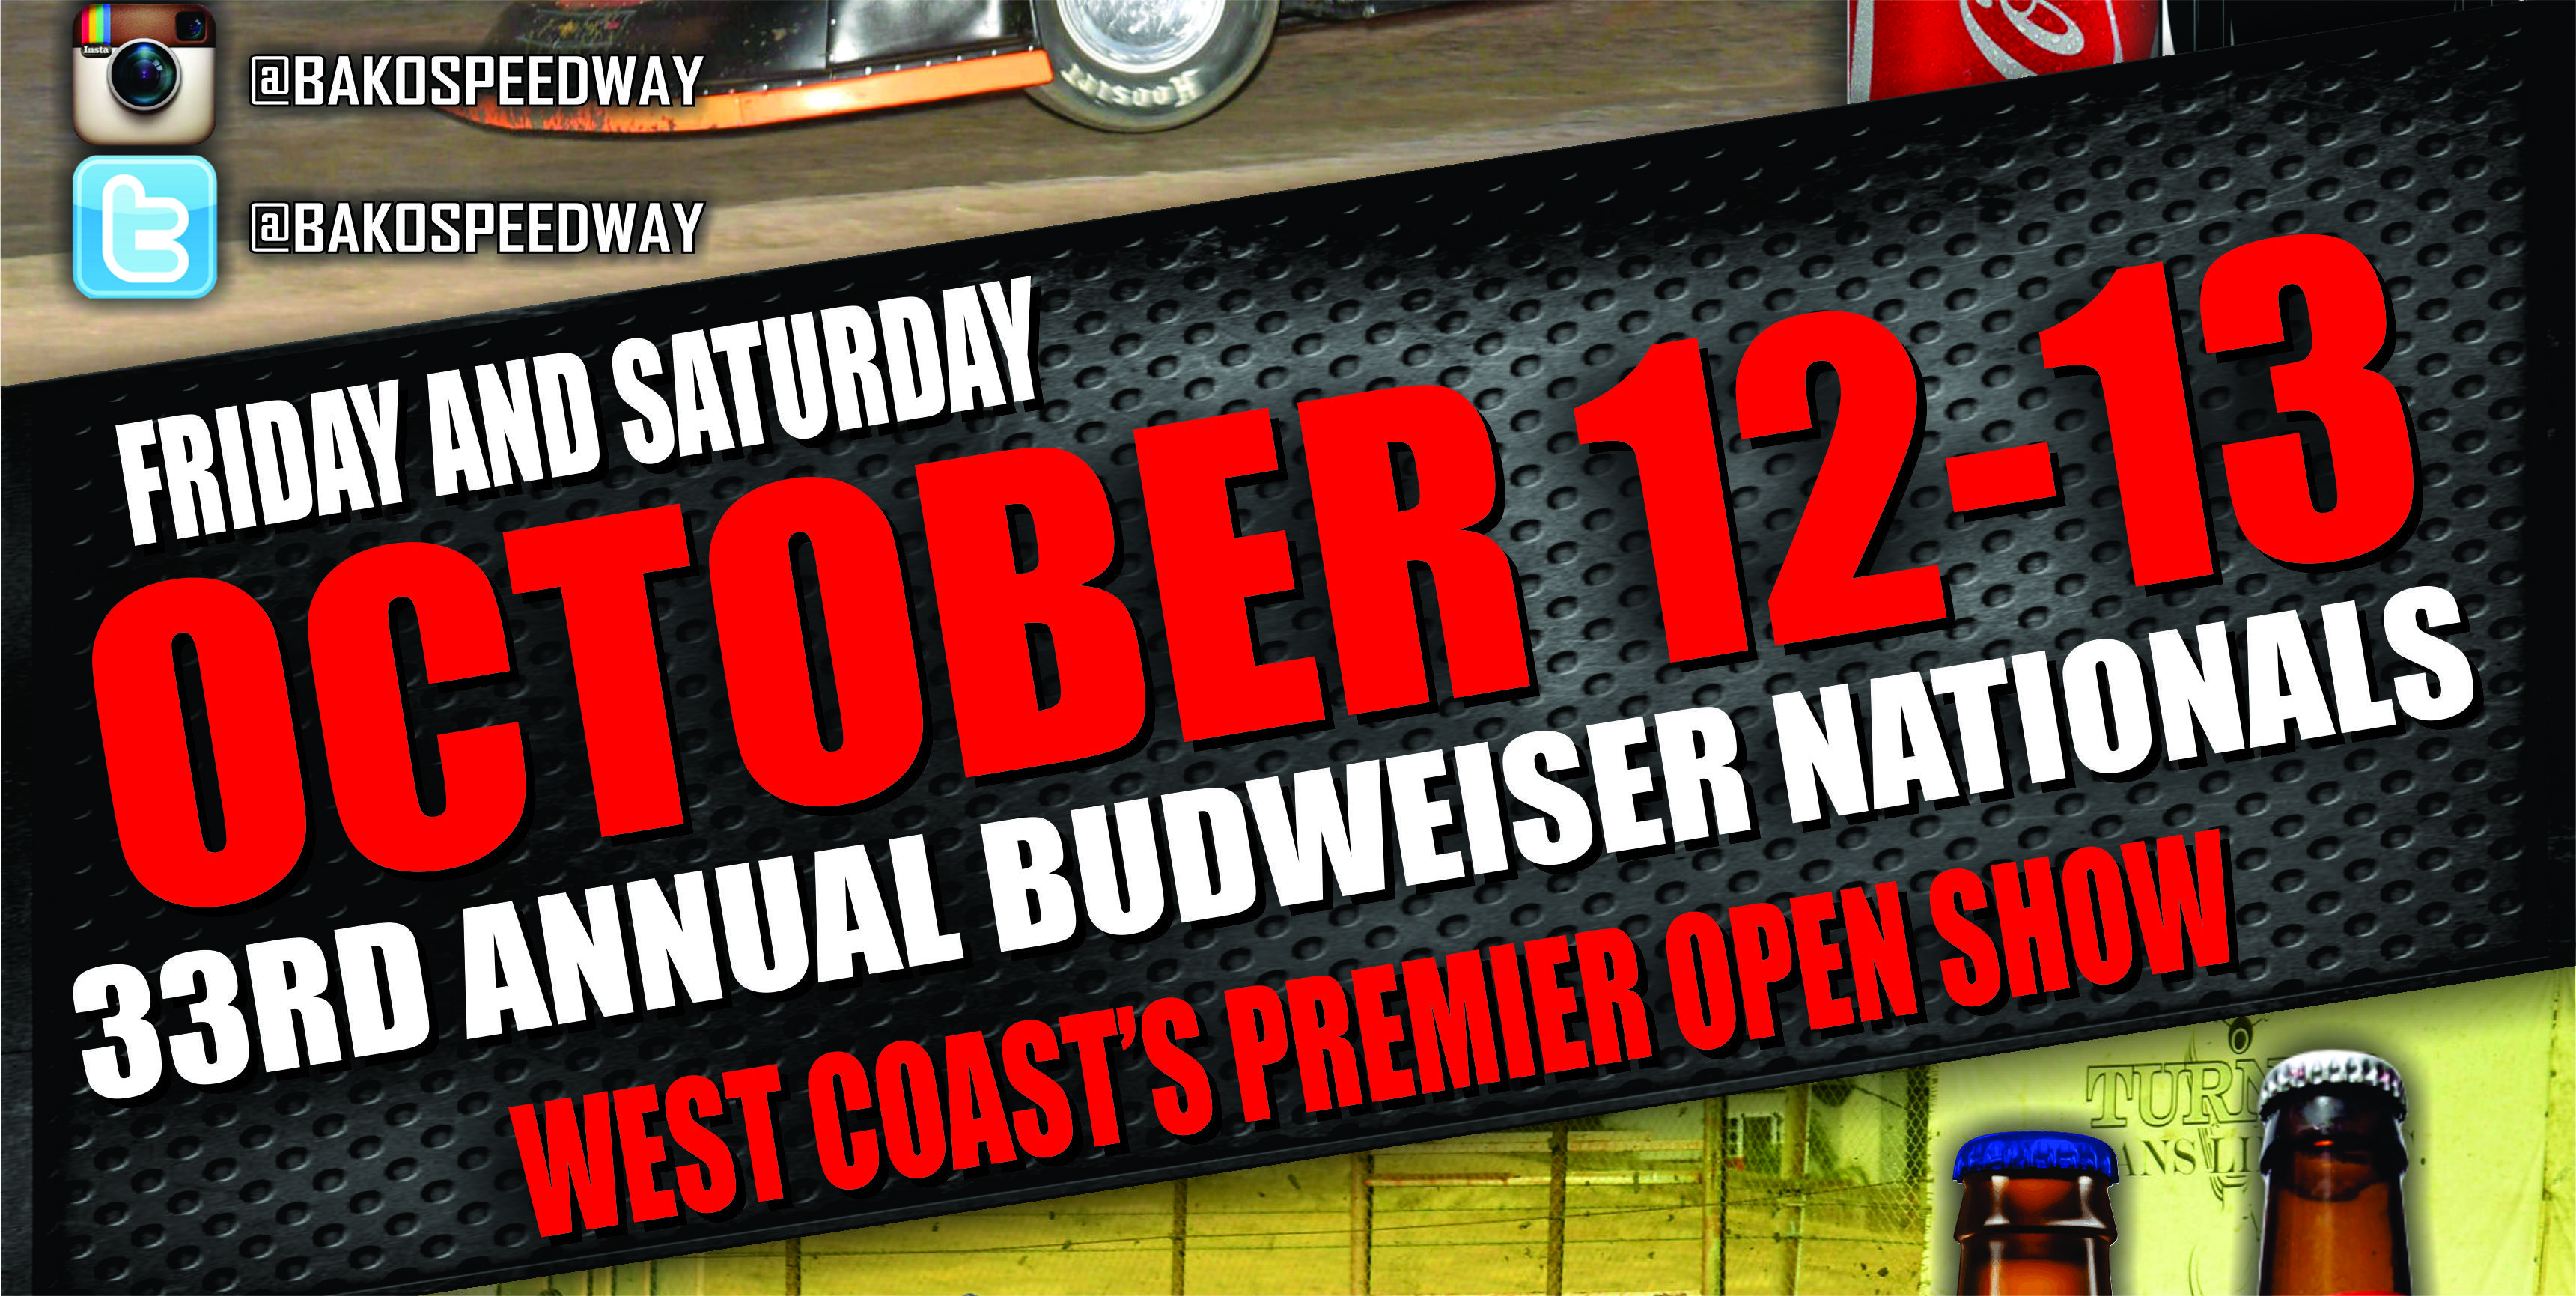 33RD ANNUAL BUDWEISER NATIONALS - LATE MODELS, MODIFIEDS, SPORTMODS, HOBBY STOCKS, PRO STOCKS